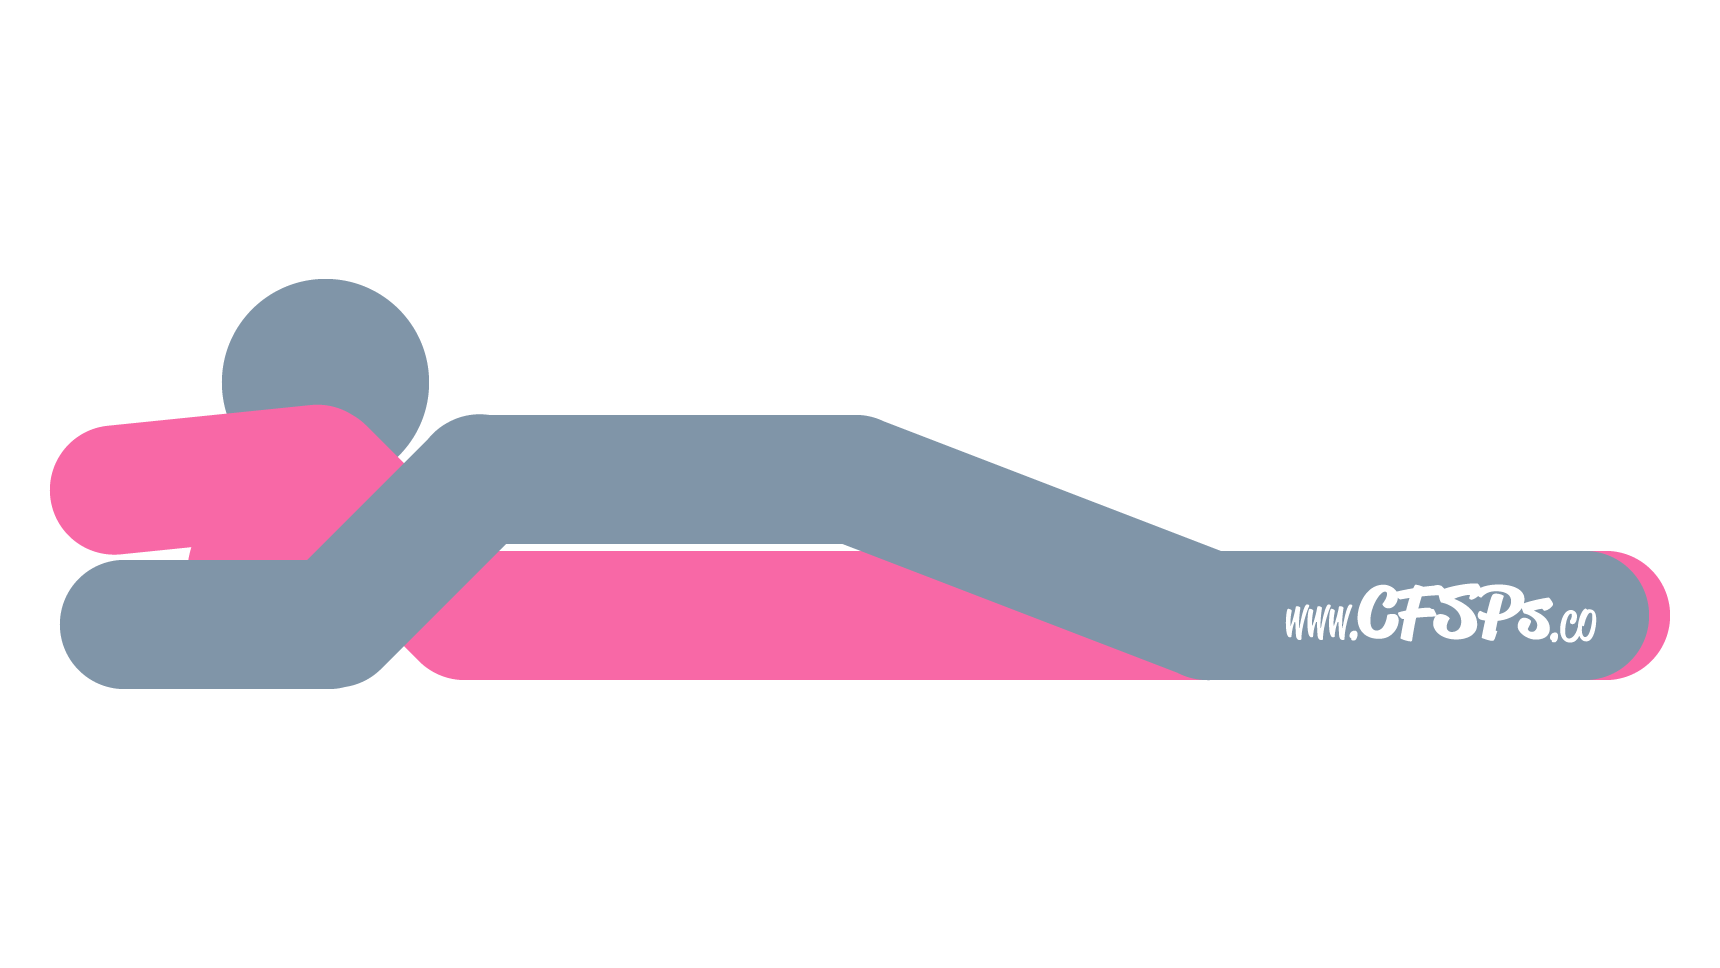 This stick figure image depicts a man and woman having sex in the Nirvana sex position. The woman is lying on her back with her legs together and arms above her head. The man is lying on top of her with his legs outside hers and supporting his upper body with his elbows near her head.